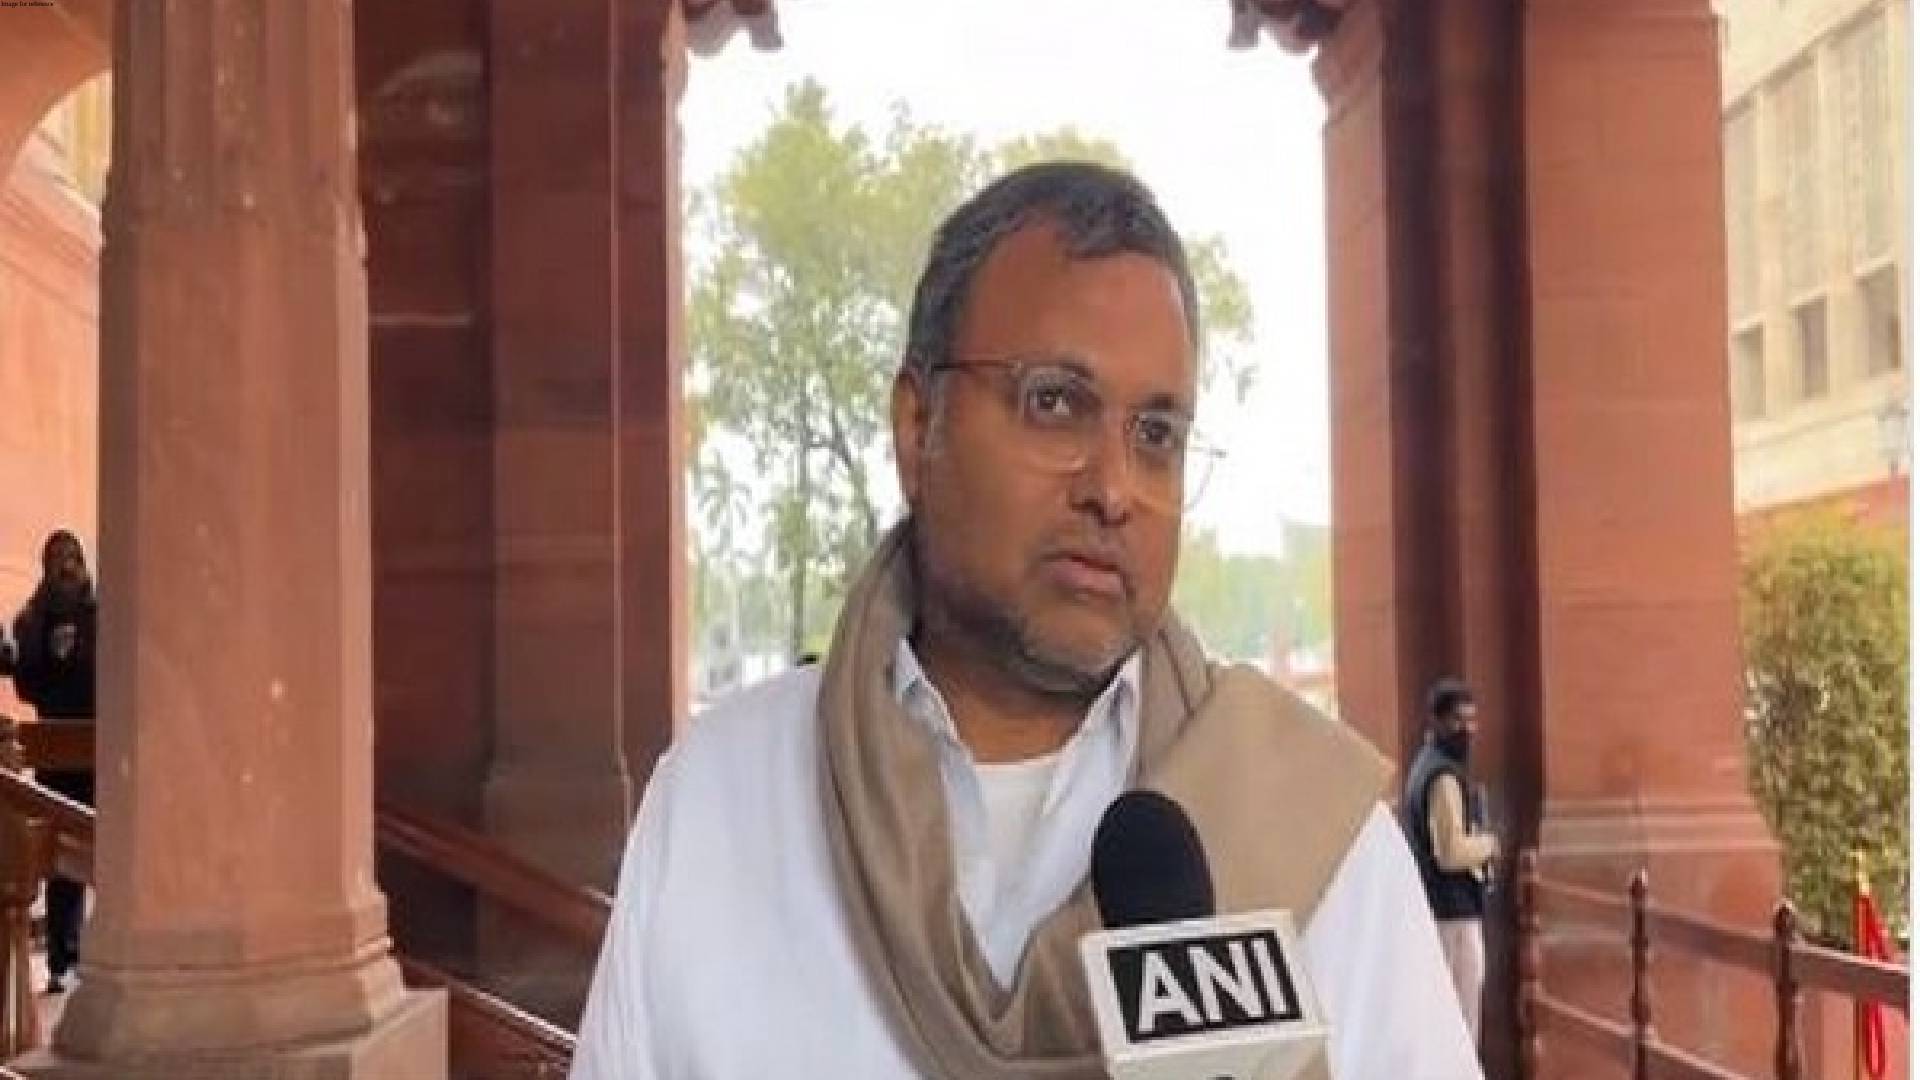 Chinese Visa Scam case: Delhi Court reserves order on cognizance point on ED's chargesheet against Karti Chidambaram, others